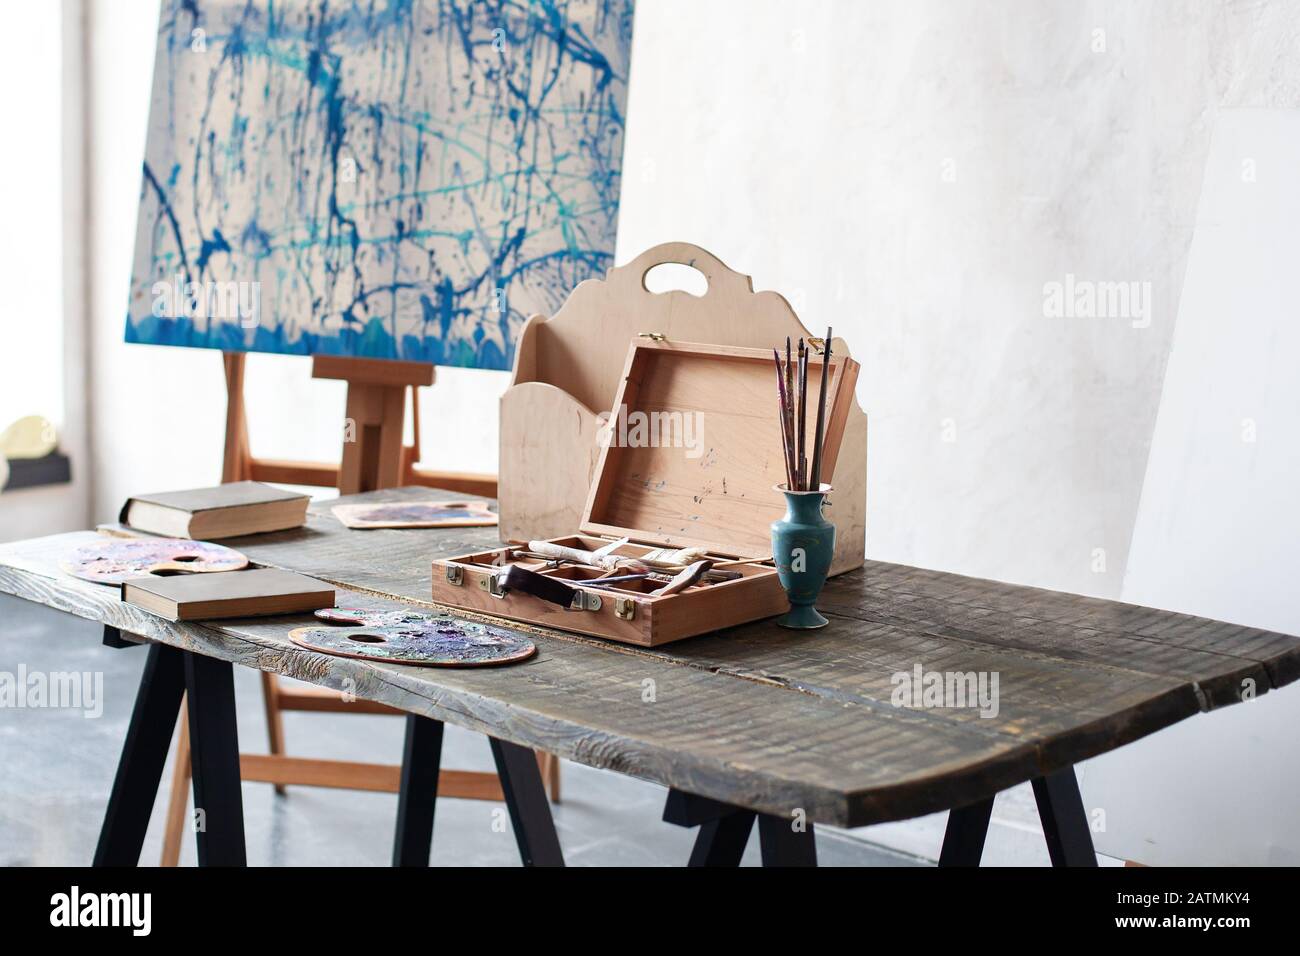 https://c8.alamy.com/comp/2ATMKY4/workplace-of-the-artist-artwork-tools-on-a-wooden-table-clutter-in-artists-workshop-watercolors-brushes-palette-easel-and-painting-tools-2ATMKY4.jpg